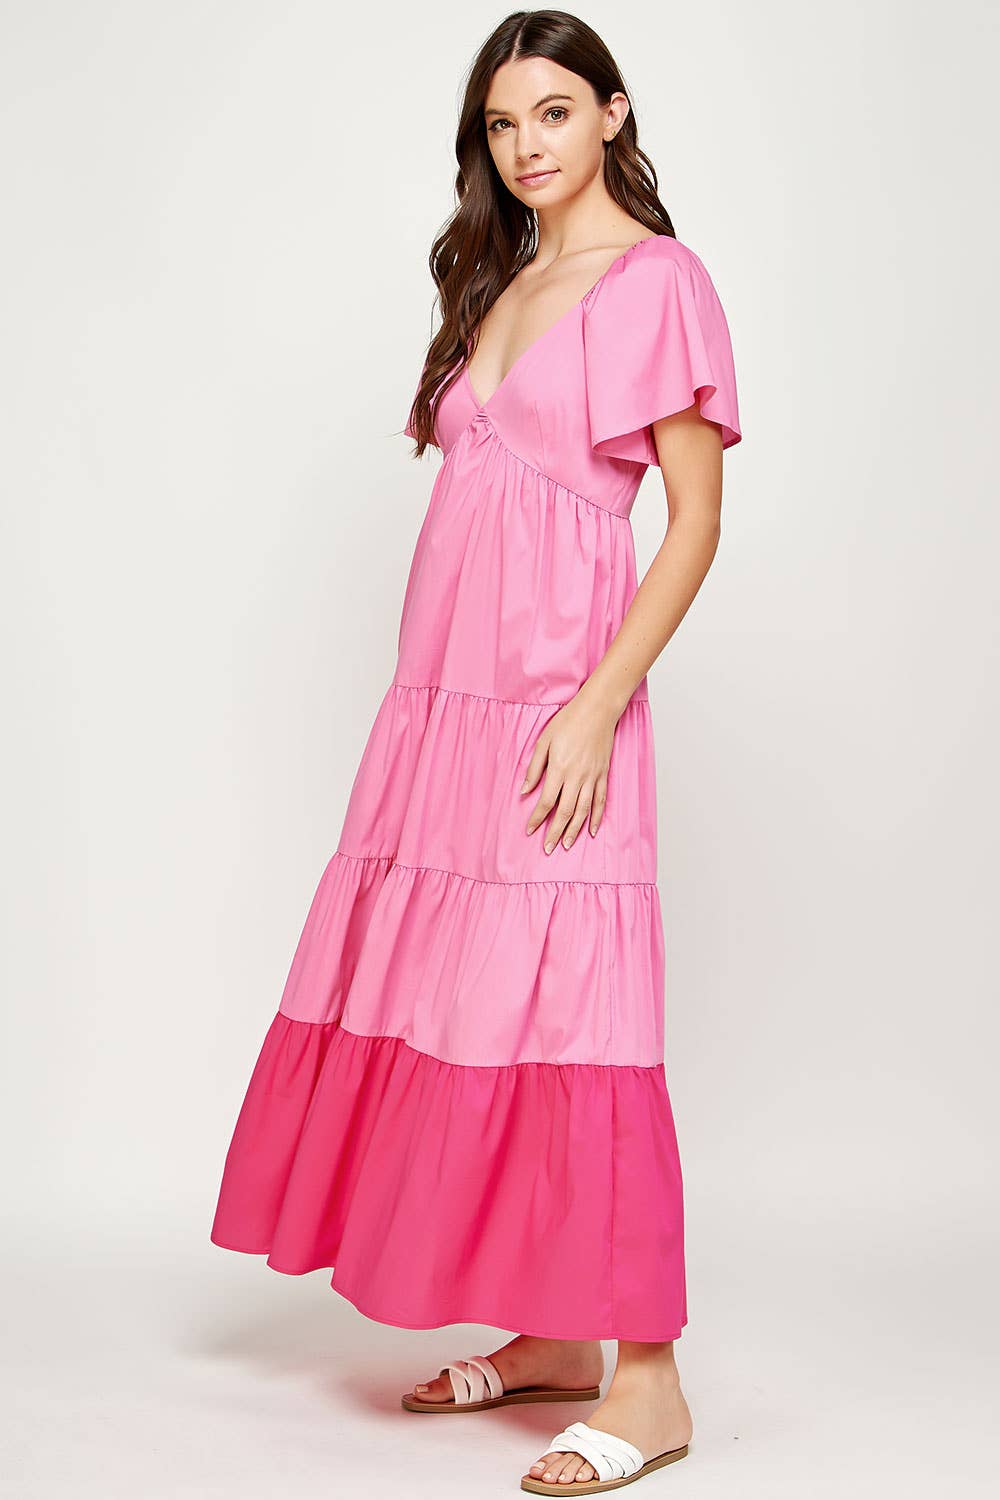 Take Me To The Winery Pink Maxi Dress